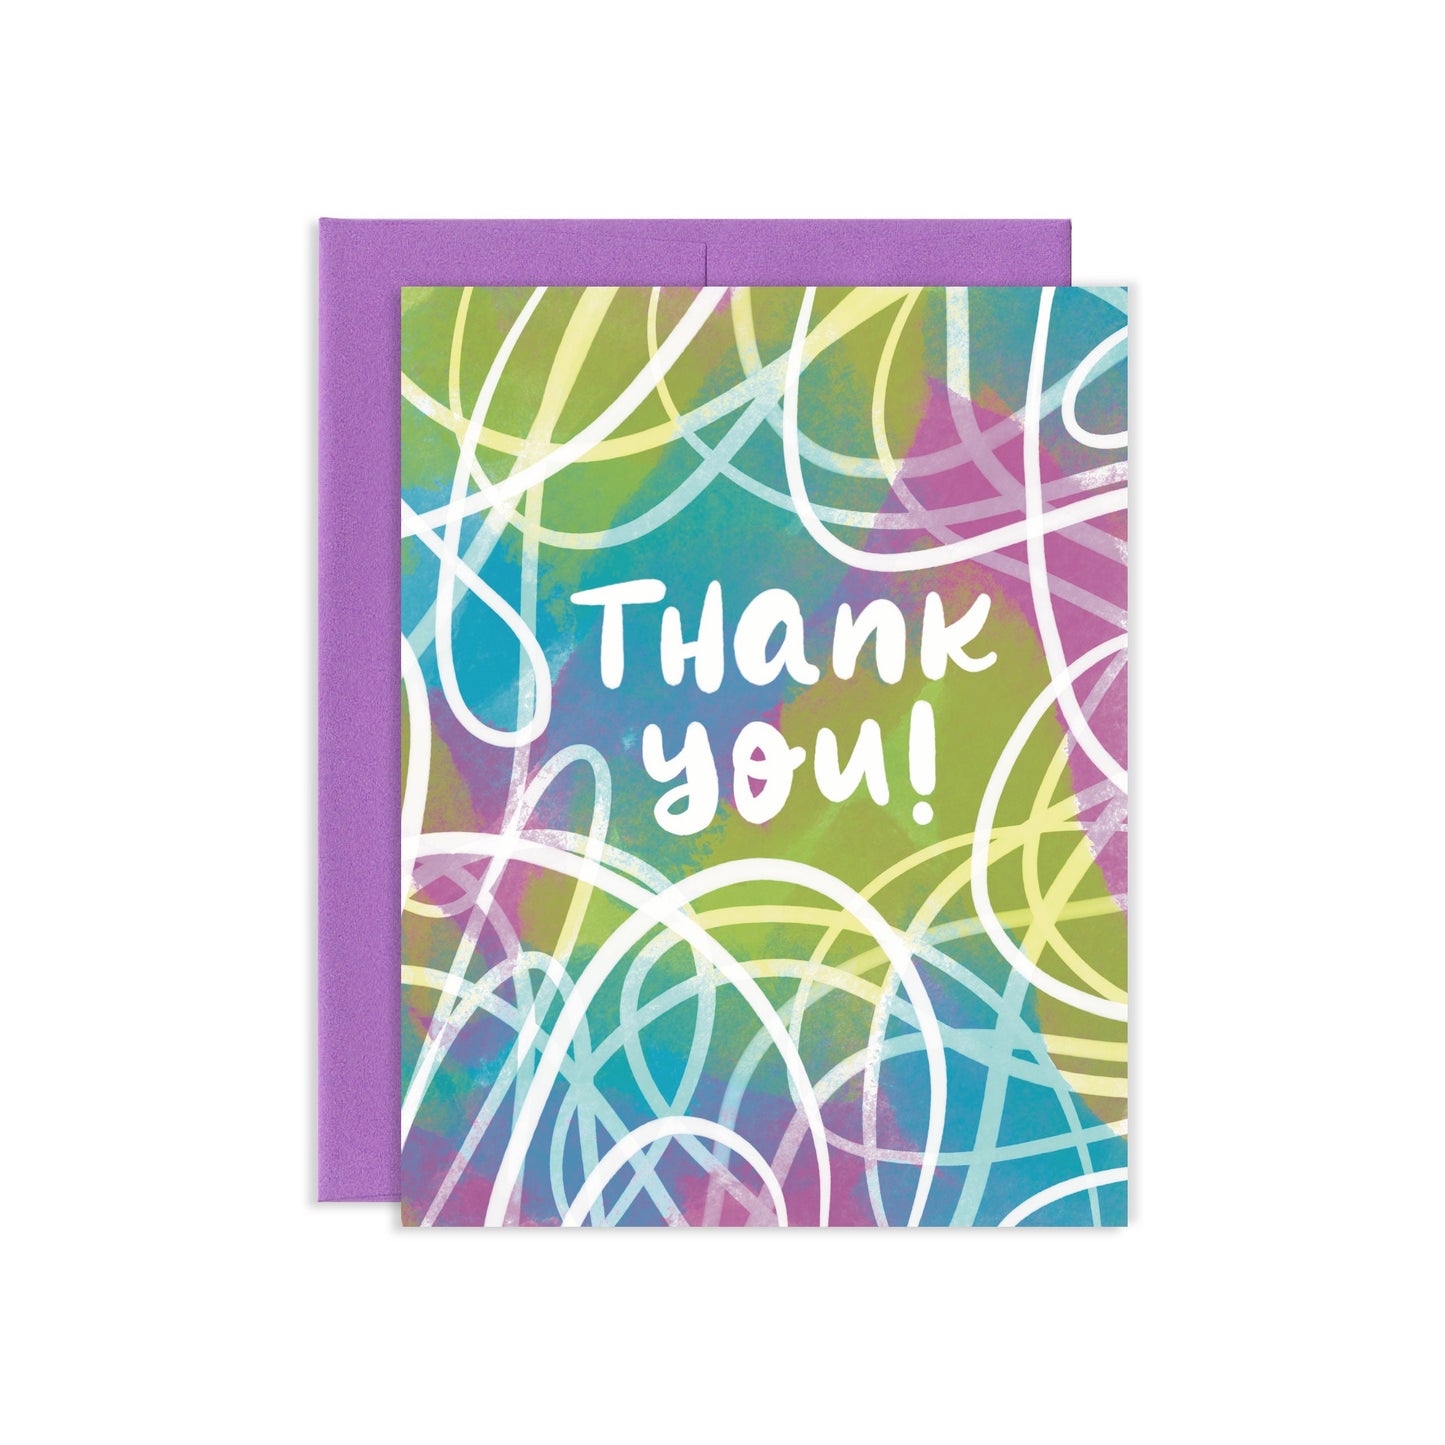 Thank You Paint Greeting Card